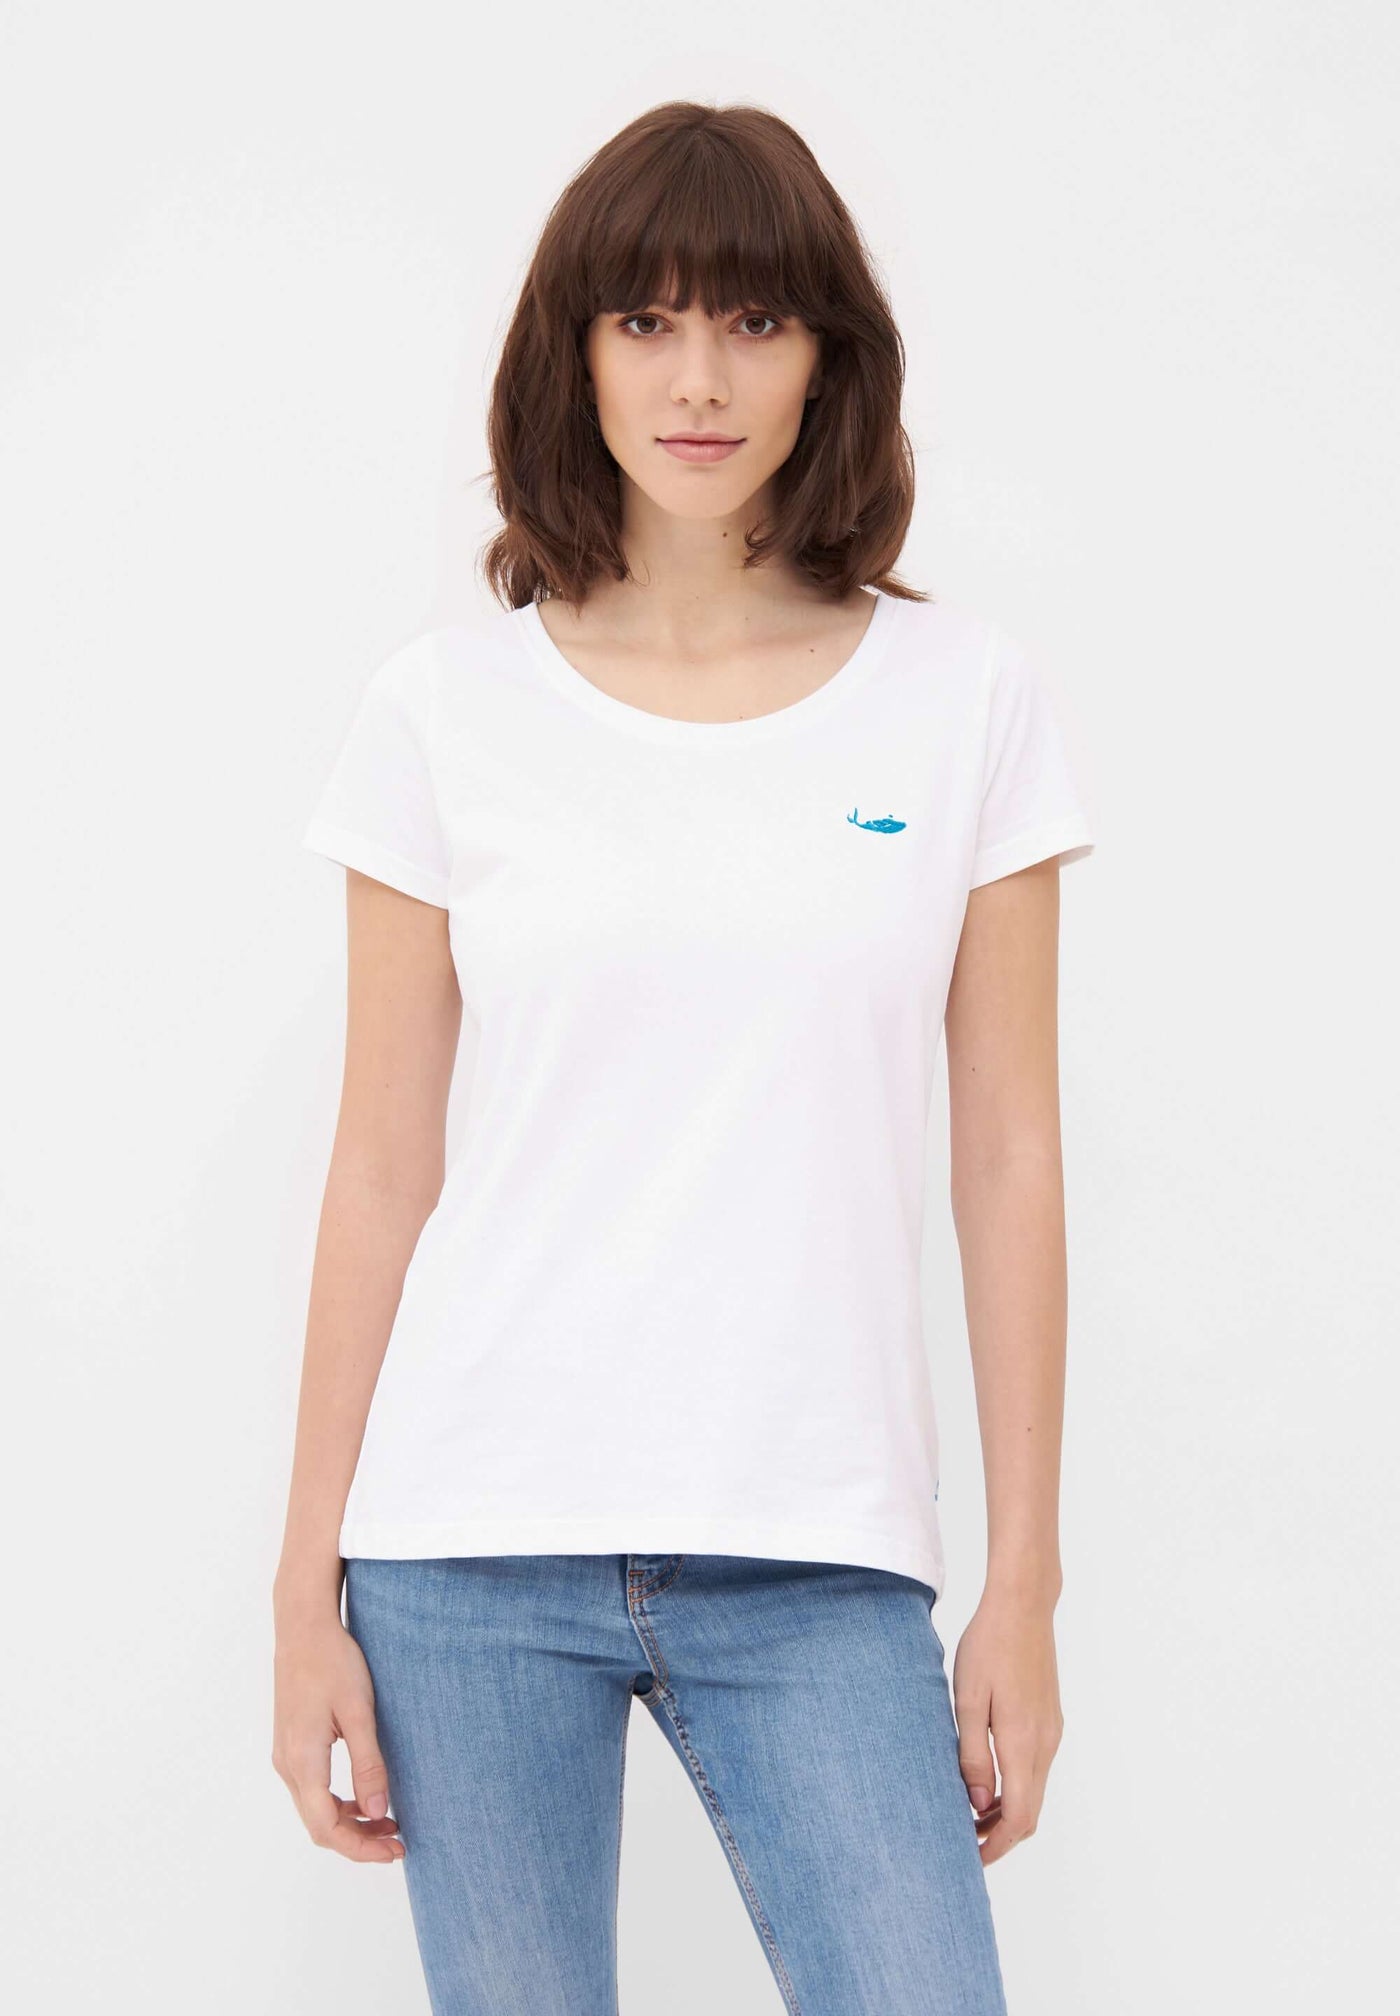 MBRC WOMEN SUSTAINABLE WHITE T-SHIRT "LIGHT BLUE LOGO" - FRONTAL VIEW